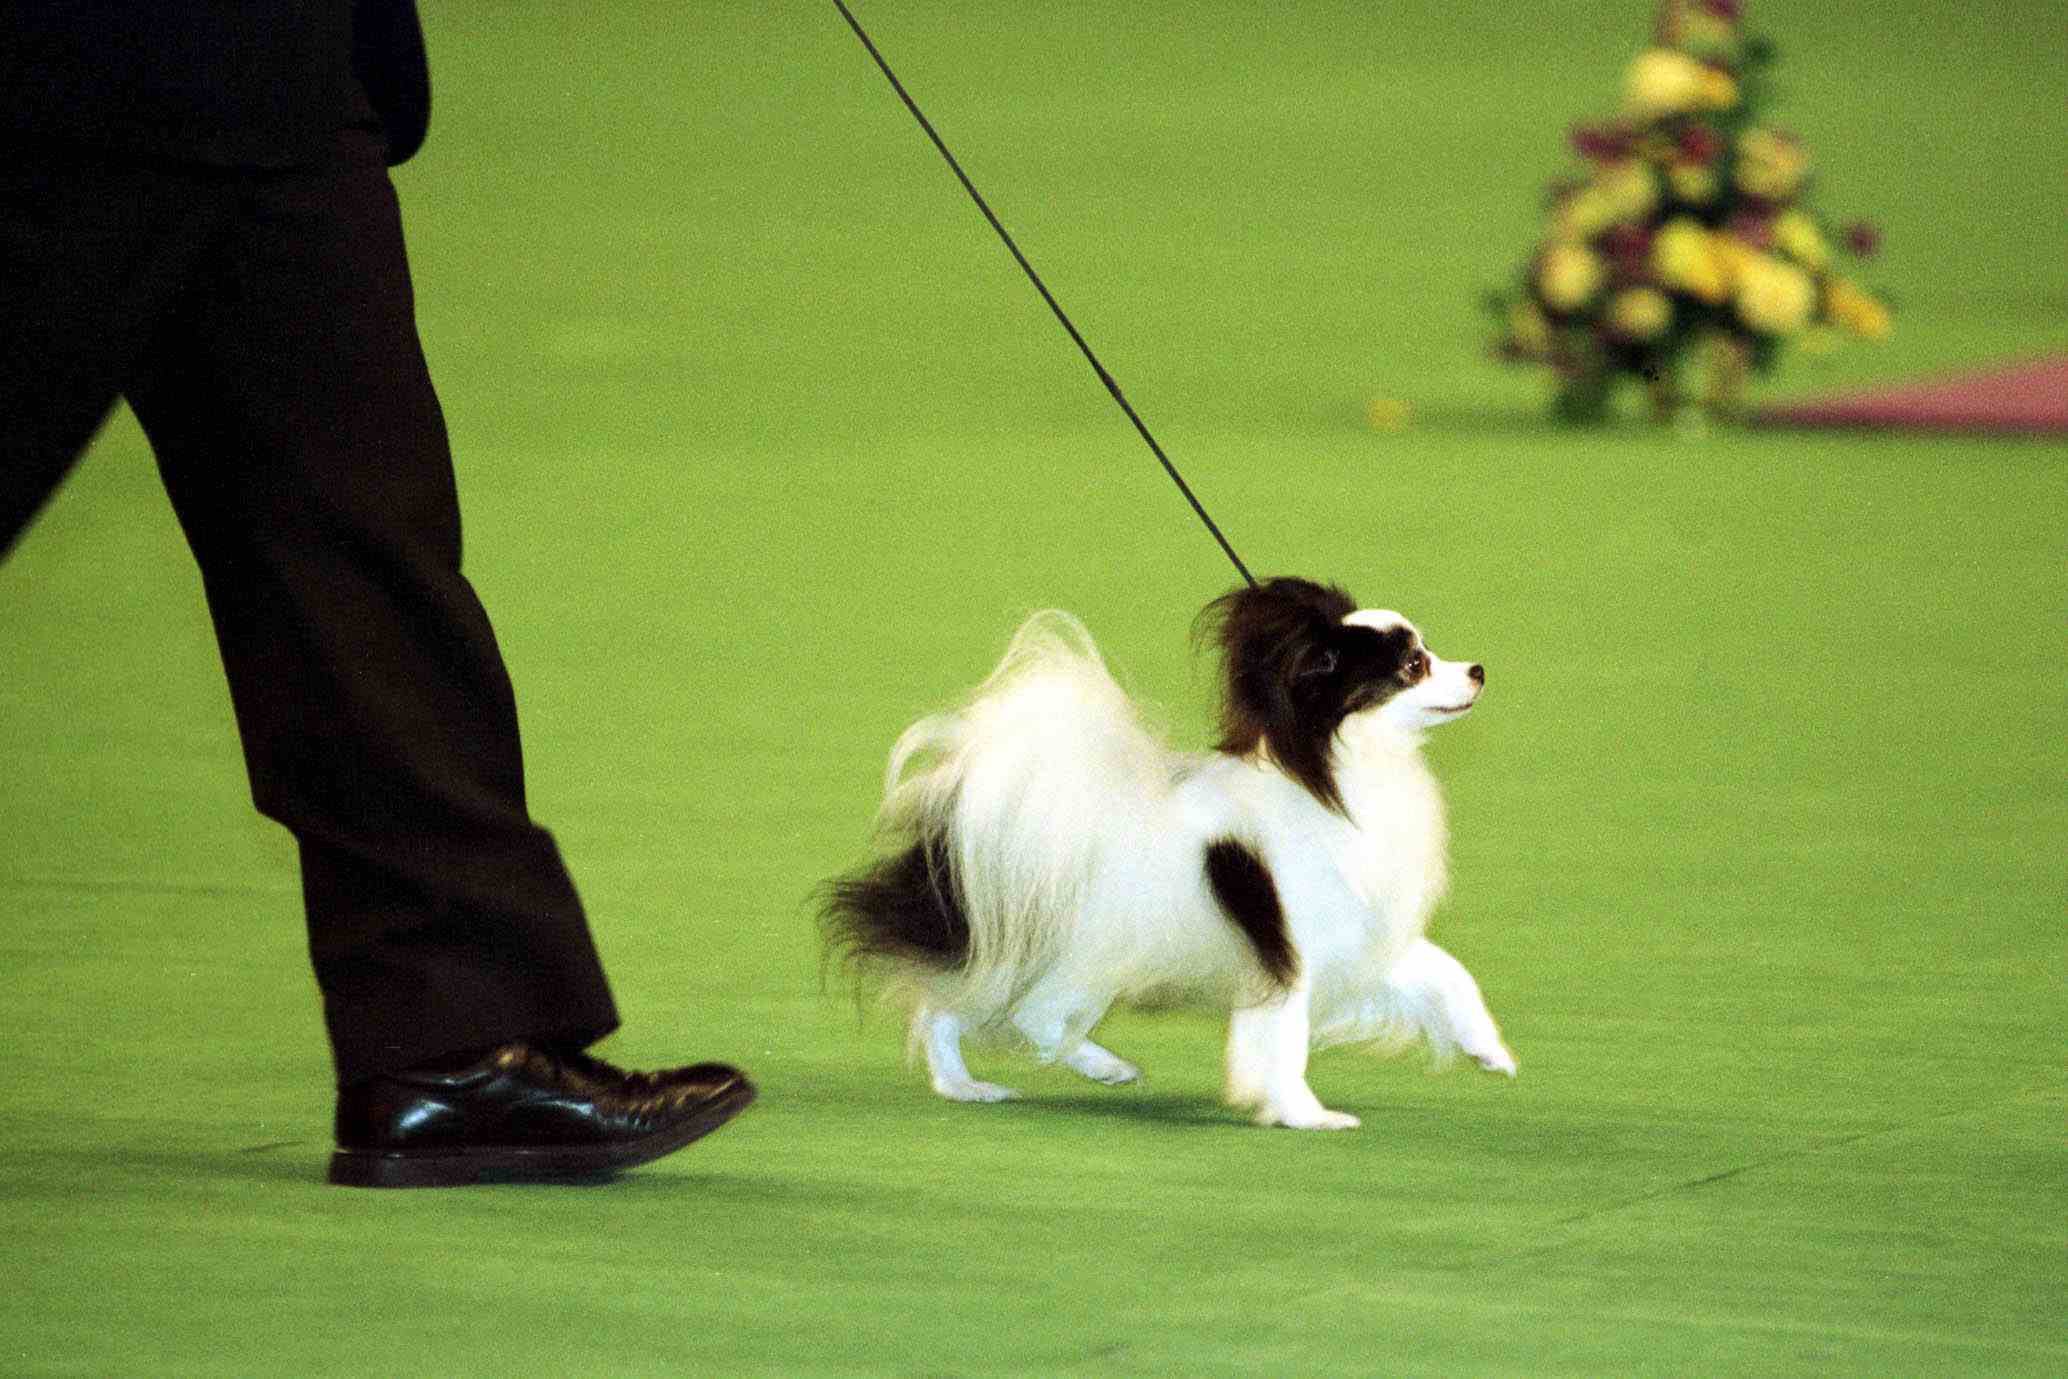 1999 Westminister Kennel club dog Show winner of Best-In-Show Ch. Loteki Supernatural Being or Kirby as he is known struts his stuff in the center ring.